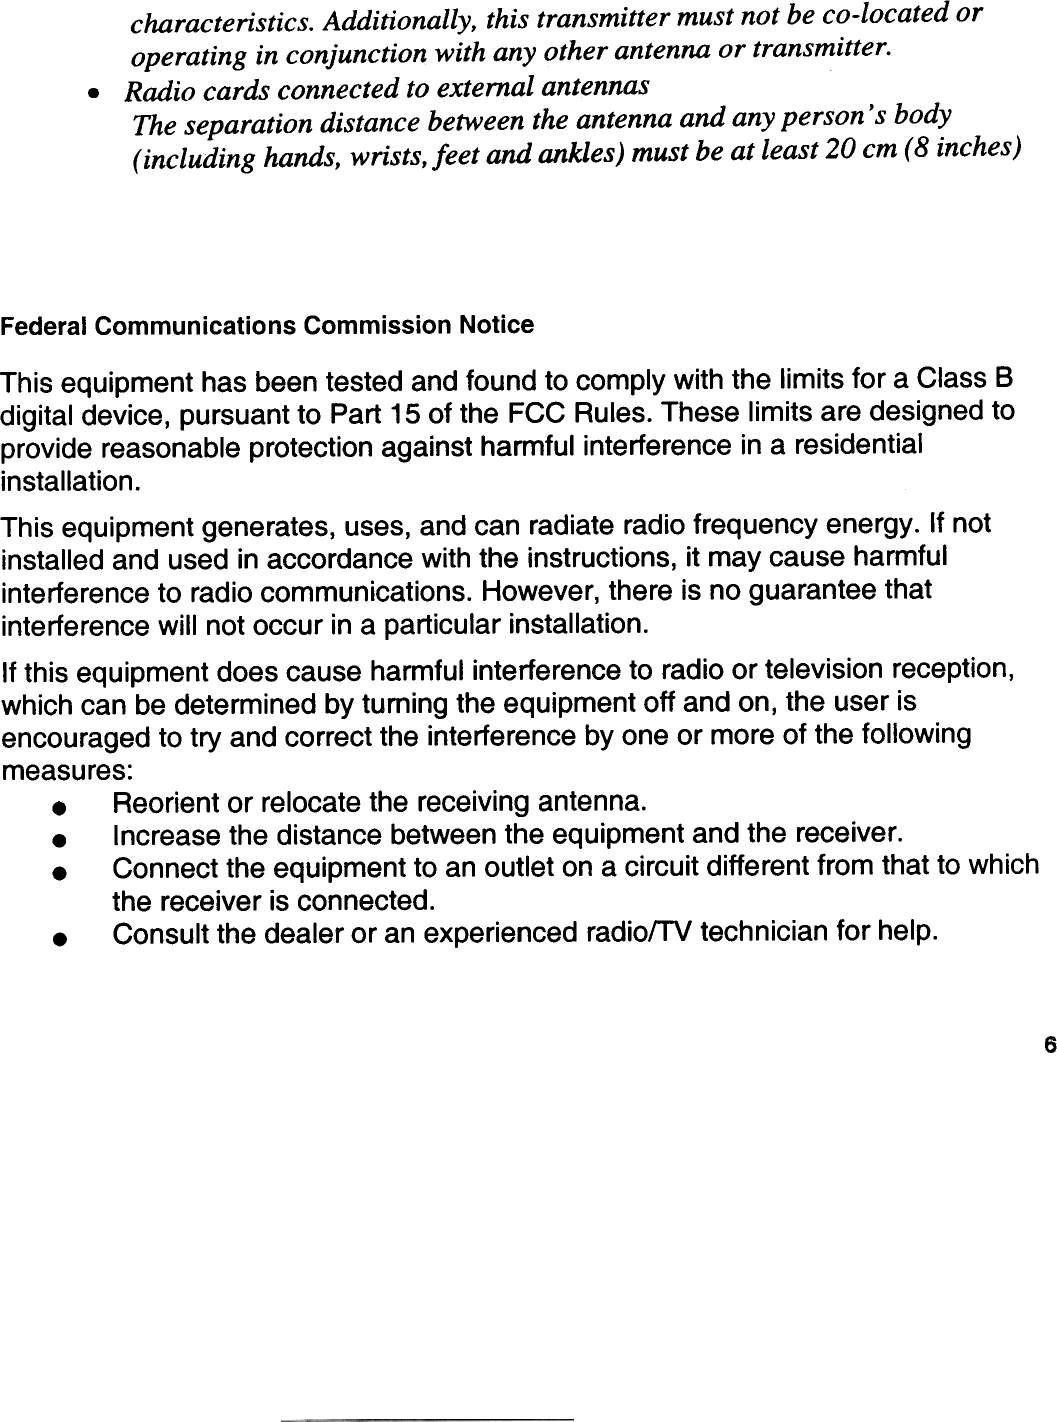 .characteristics. Additionally, this transmitter must not be co-located oroperating in conjunction with any other antenna or transmitter.Radio cards connected to extemal antennasThe separation distance between the antenna and any person &apos; s body(including hands, wrists, leef and ankles) must be at least 20 cm (8 inches)Federal  Communications Commission NoticeThis equipment  has been tested  and found to comply  with the limits tor a Class Bdigital device,  pursuant  to Part 15 of the FCC Rules. These  limits are designed  toprovide  reasonable  protection  against  harmful  interference  in a residentialinstallation.This equipment  generates,  uses, and can radiate radio frequency  energy.  If notinstalied and used in accordance  with the instructions,  it may cause  harmfulinterference  to radio communications.  However, there  is no guarantee  thatinterference  wijl not occur in a particular installation.It this equipment  does cause  harmtul  interference  to radio or television  reception,which can be determined by tuming the equipment off and on, the user isencouraged  to try and correct the interference  by one or more ot the tollowingmeasures:.  Reorient  or relocate the receiving  antenna..  Increase  the distance  between the equipment  and the receiver..  Connect  the equipment  to an outlet on a circuit different  trom that to whichthe receiver  is connected..  Consult the dealer or an experienced radiofTV technician tor help.6